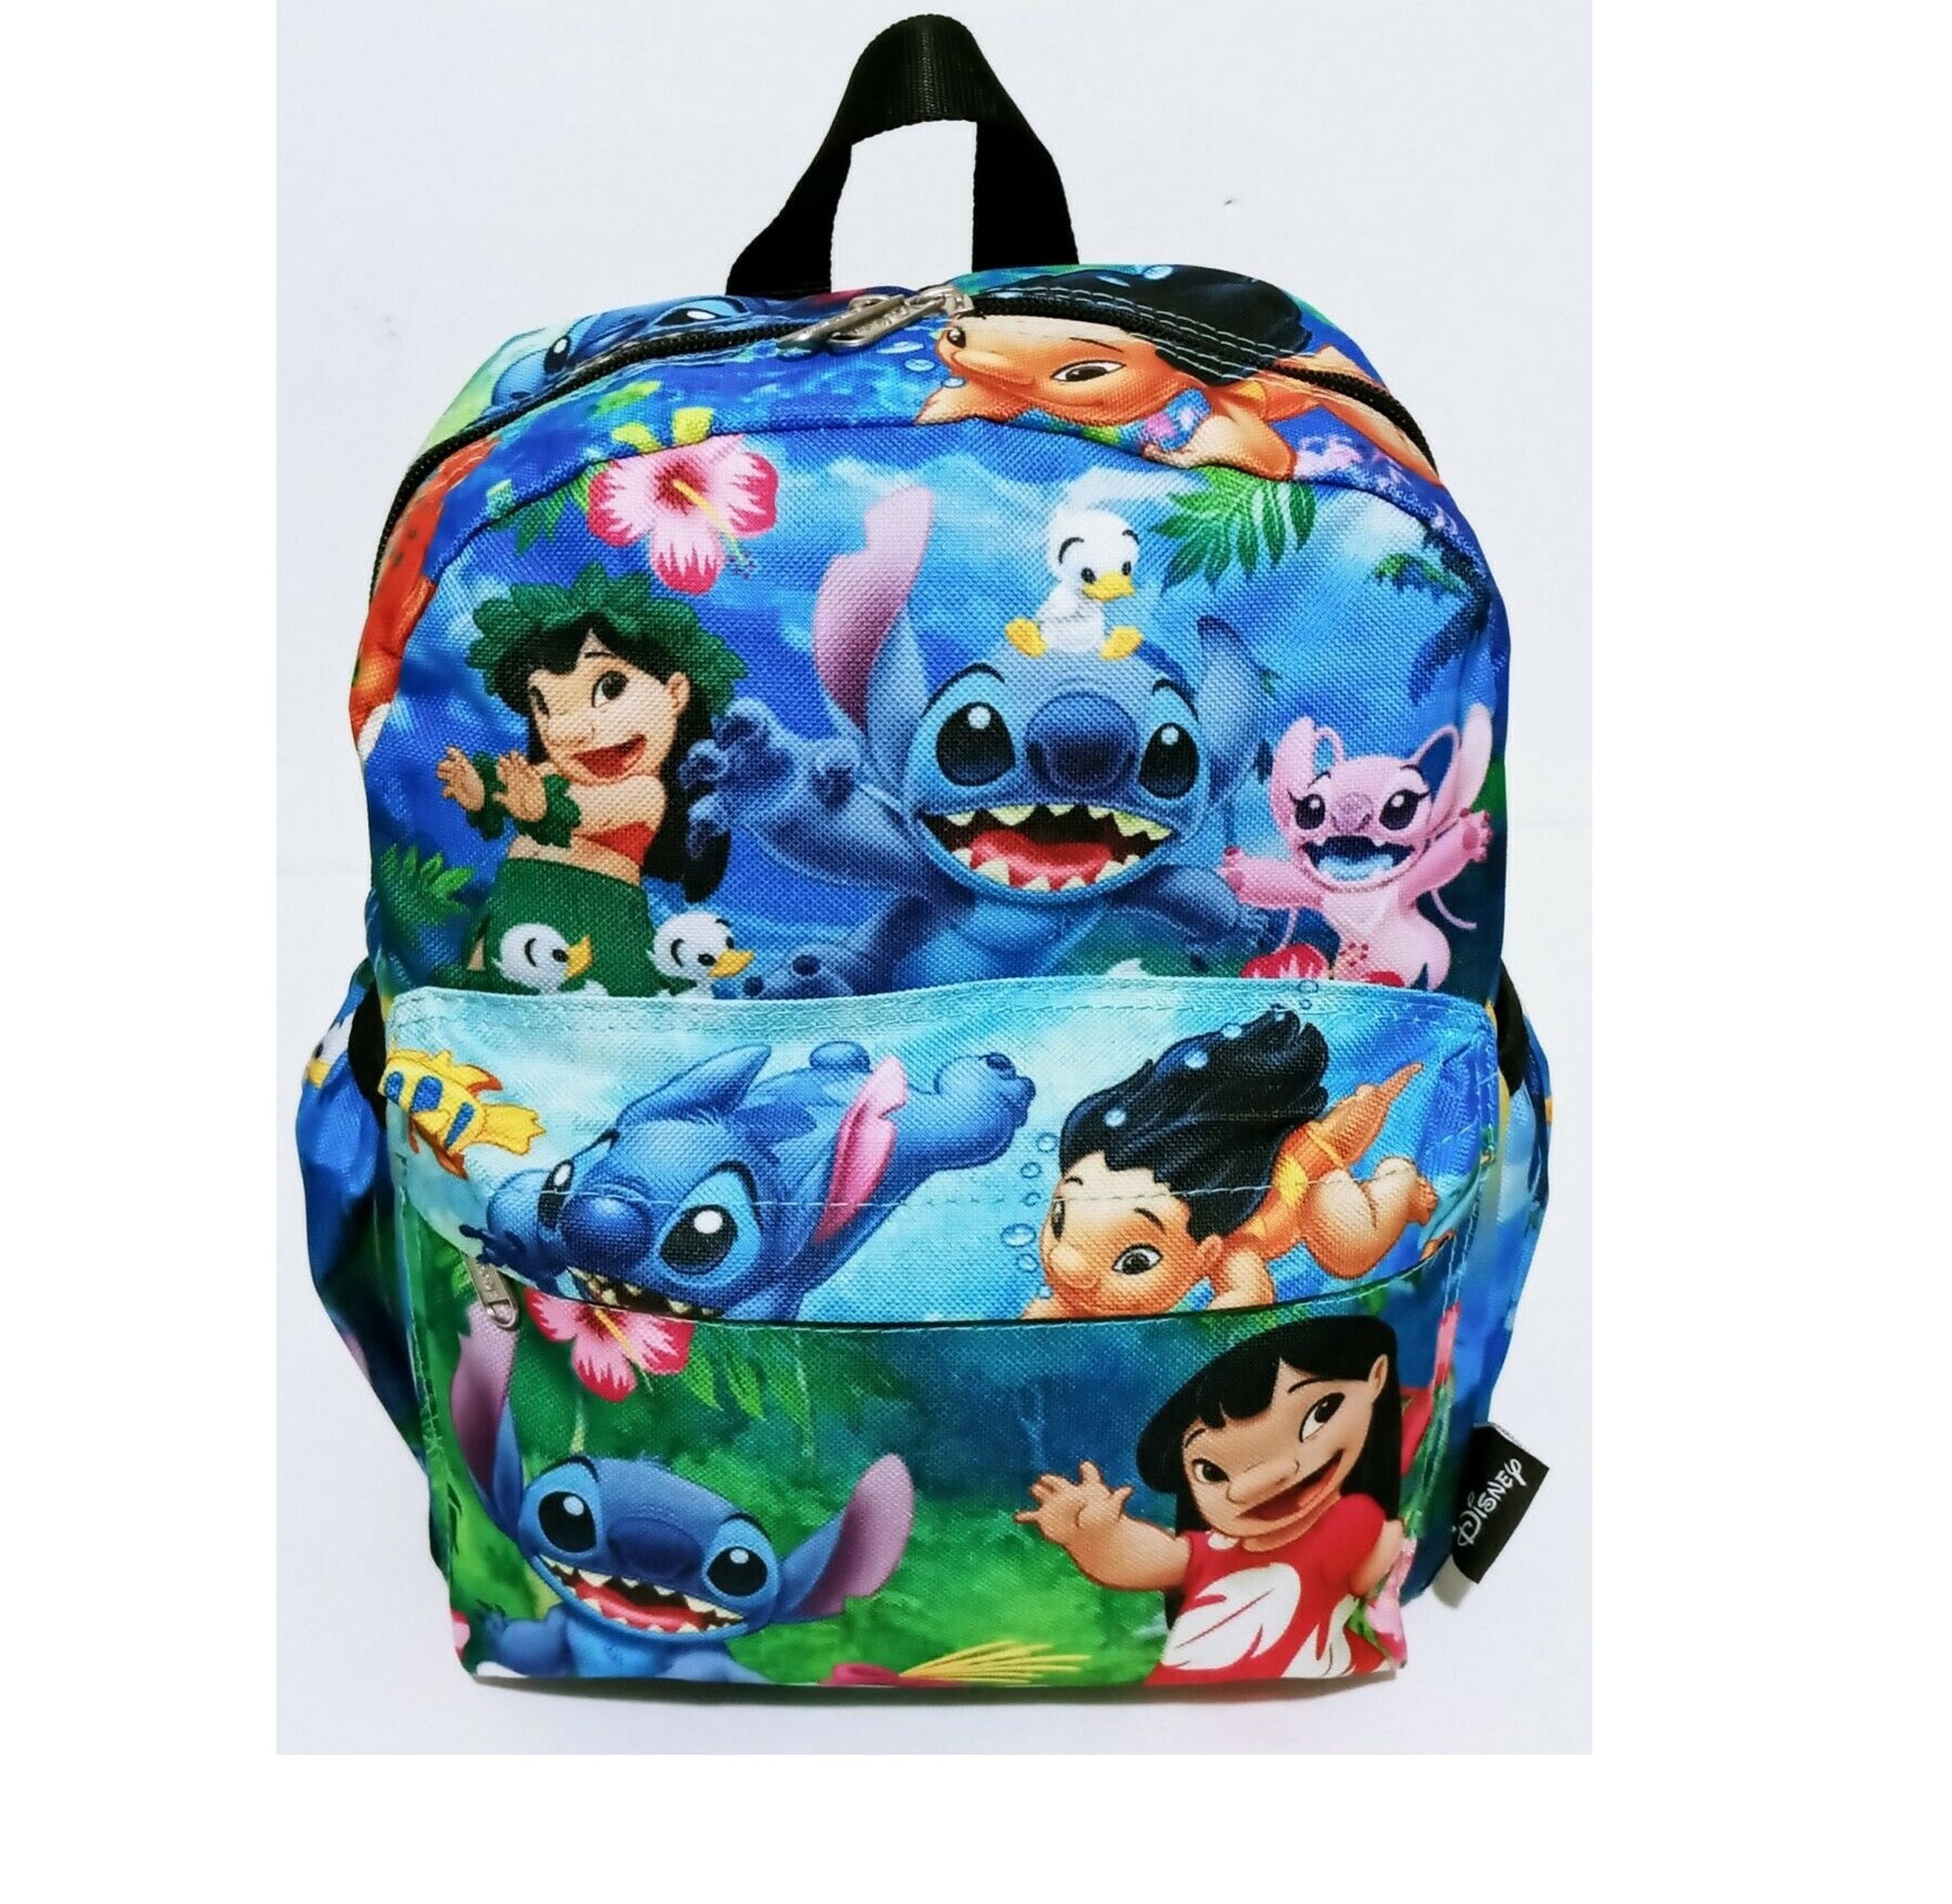 Lilo & Stitch ©Disney double zip pencil case - See All - BAGS, BACKPACKS -  Girl - Kids 